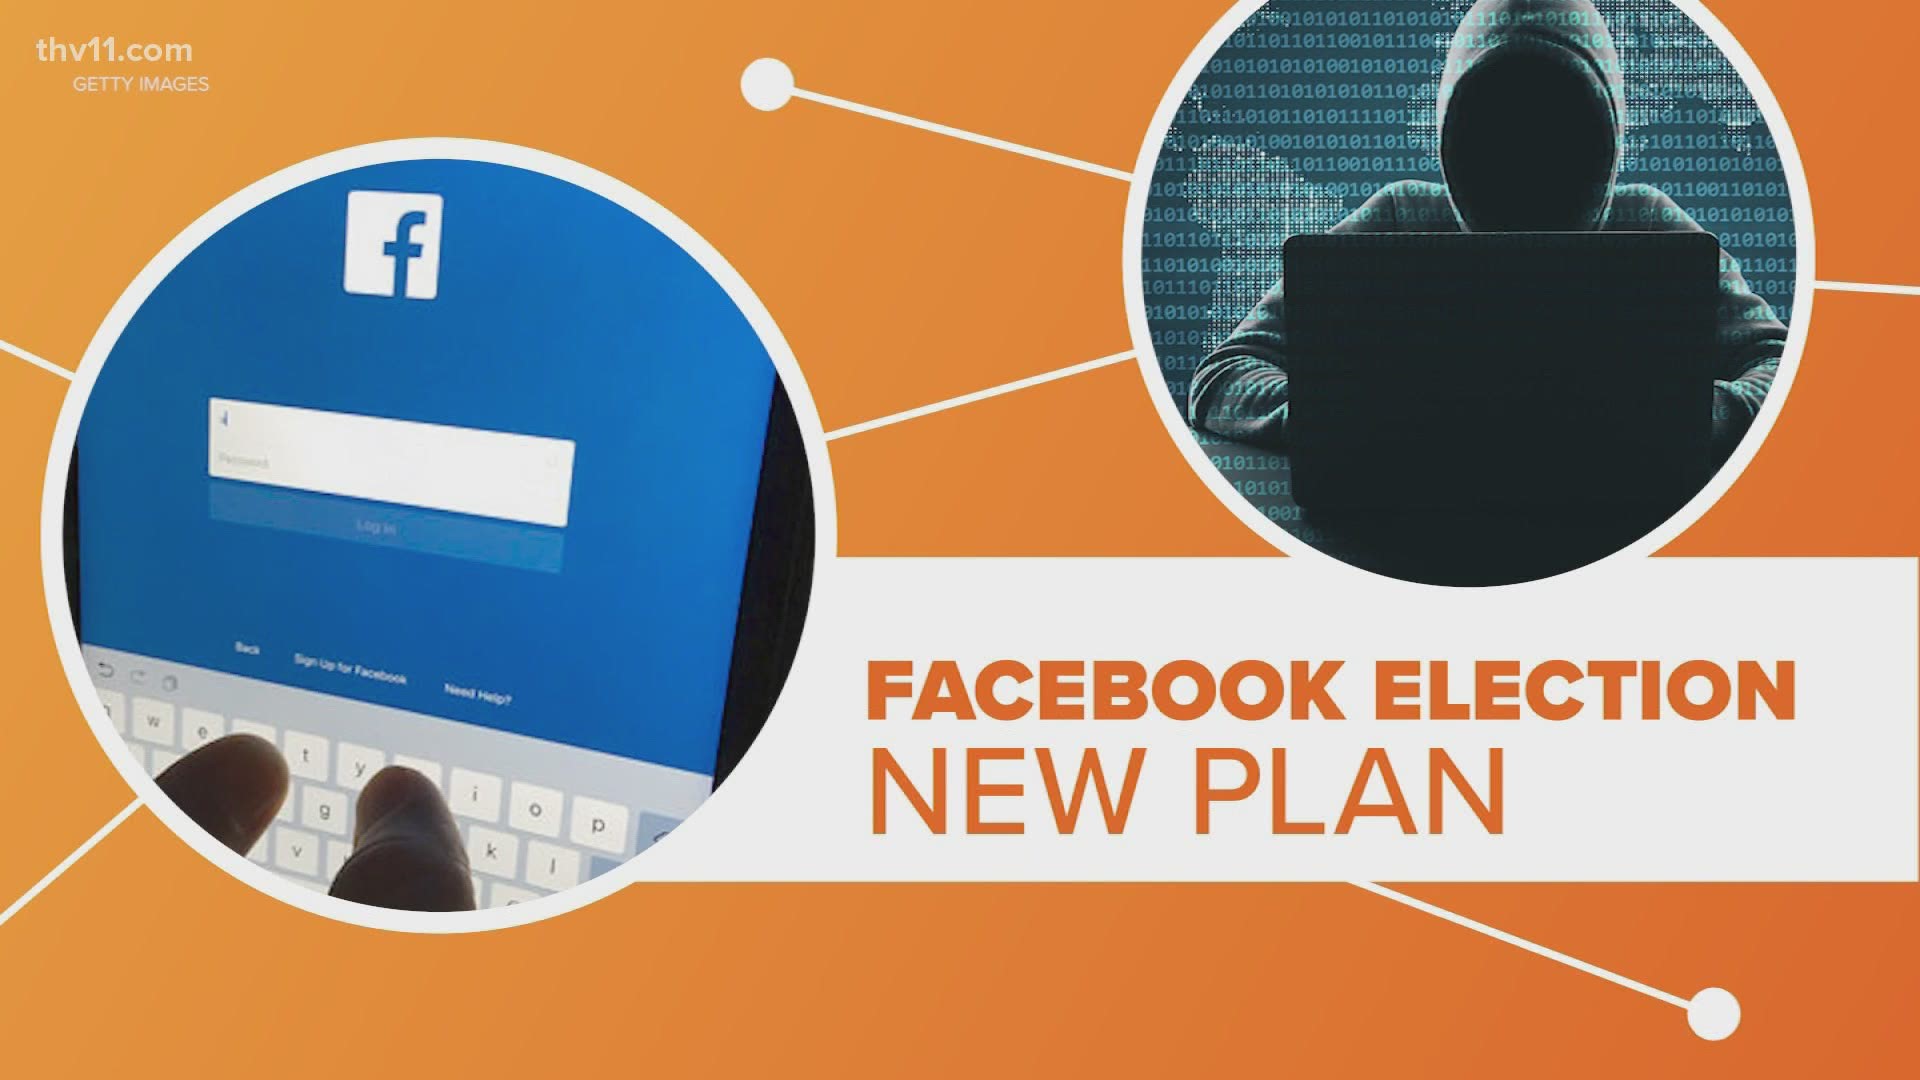 Facebook is back in the news regarding the 2020 presidential election and not for good reasons.